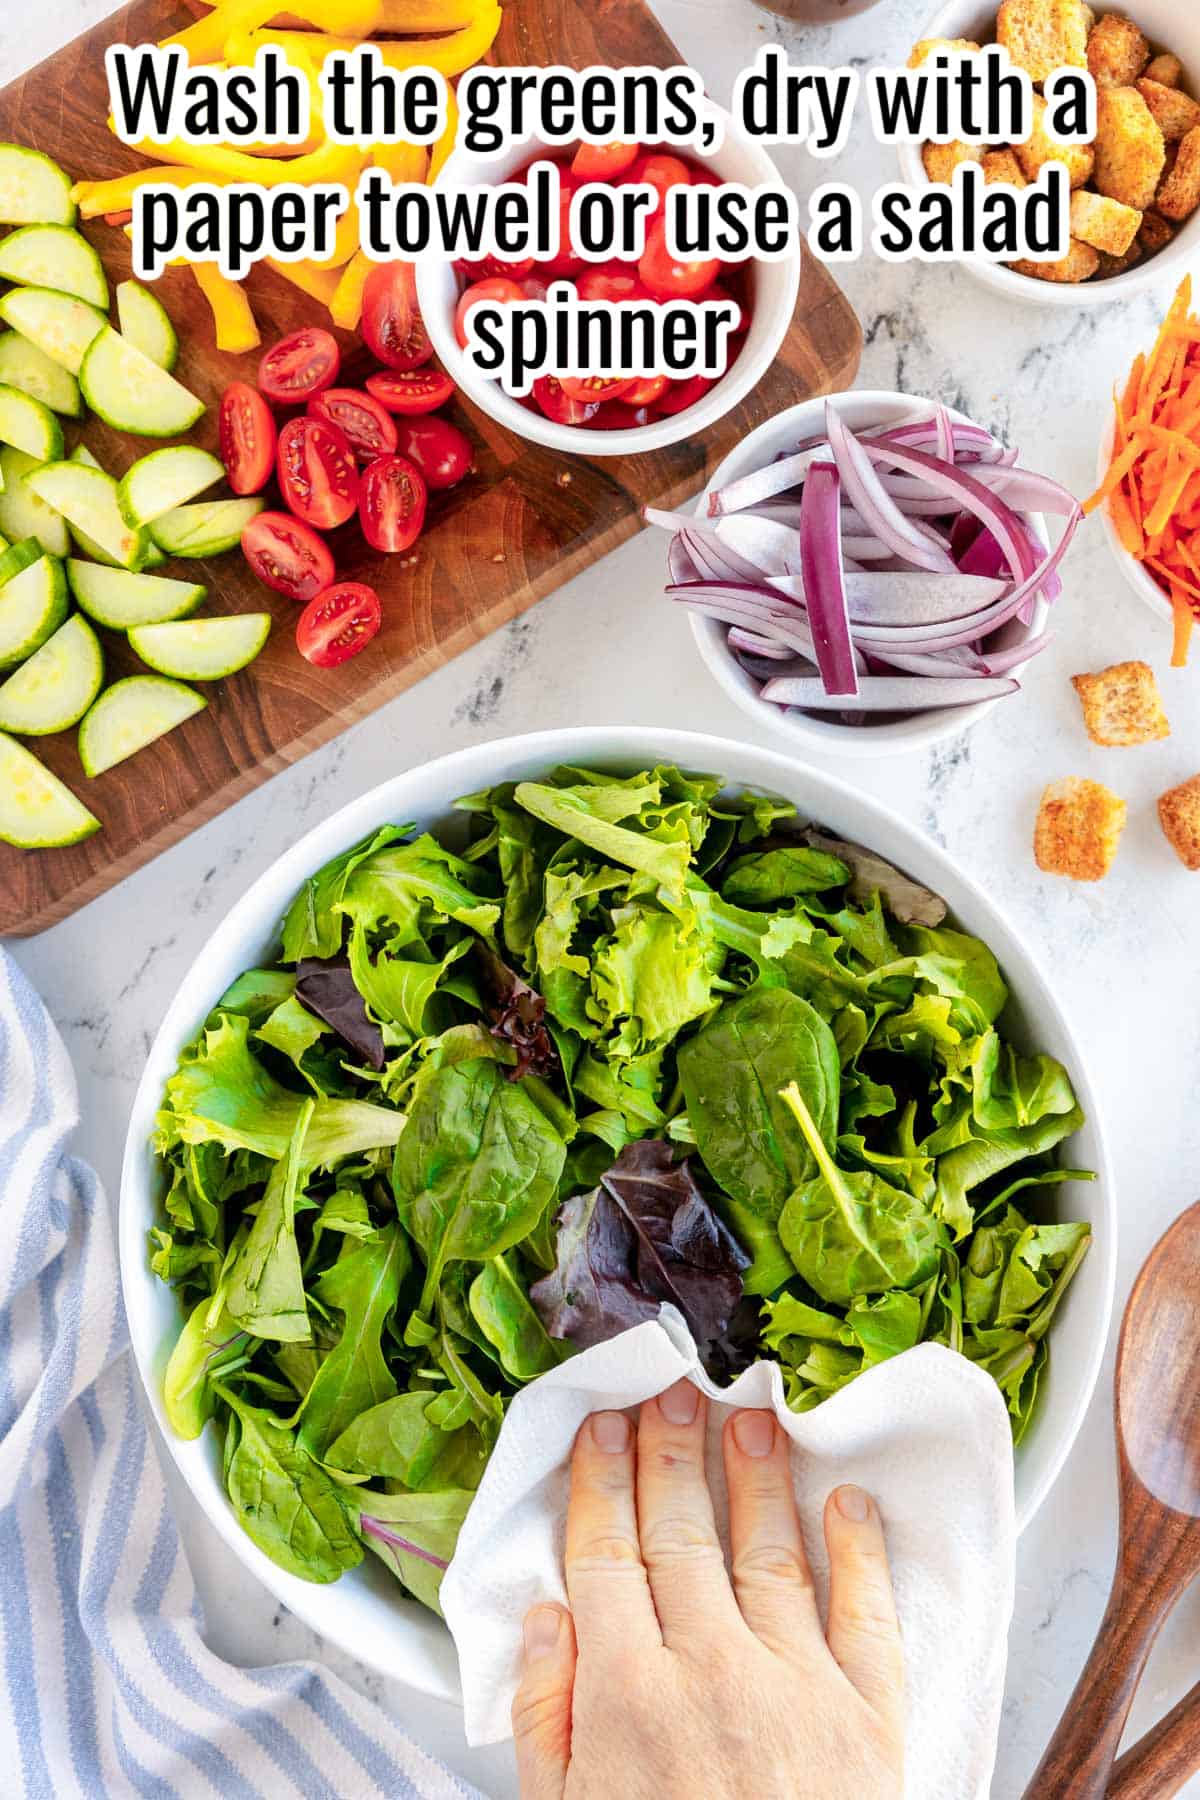 greens in a white bowl with the words "Wash the greens, dry with a paper towel or use a salad spinner overlaid in text.